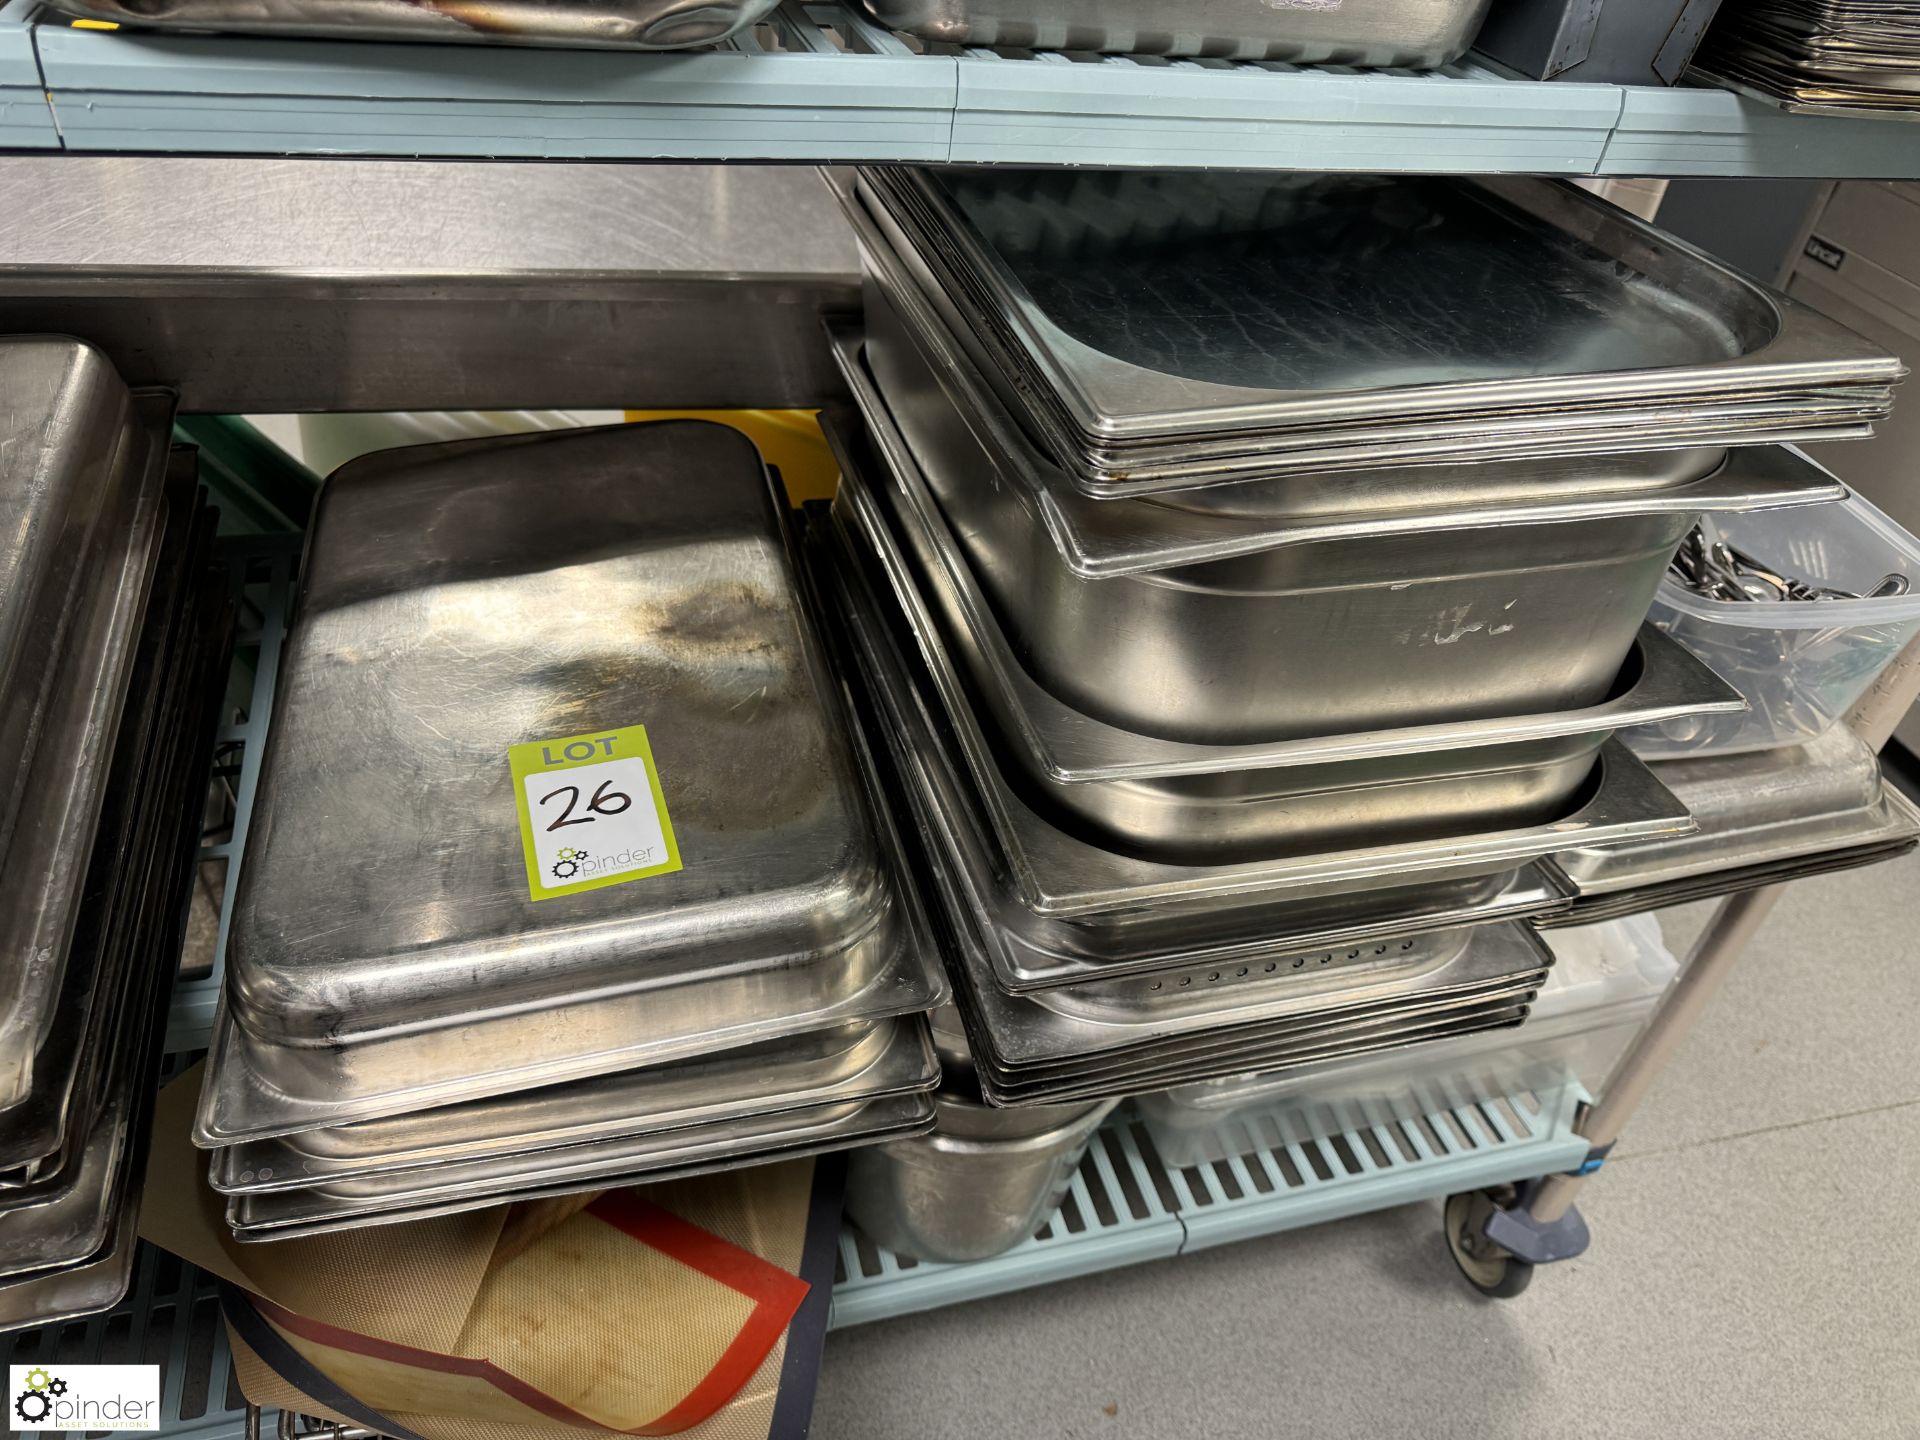 Large quantity Cooking Trays, etc, to rack (rack not included) (location in building – basement - Bild 6 aus 9